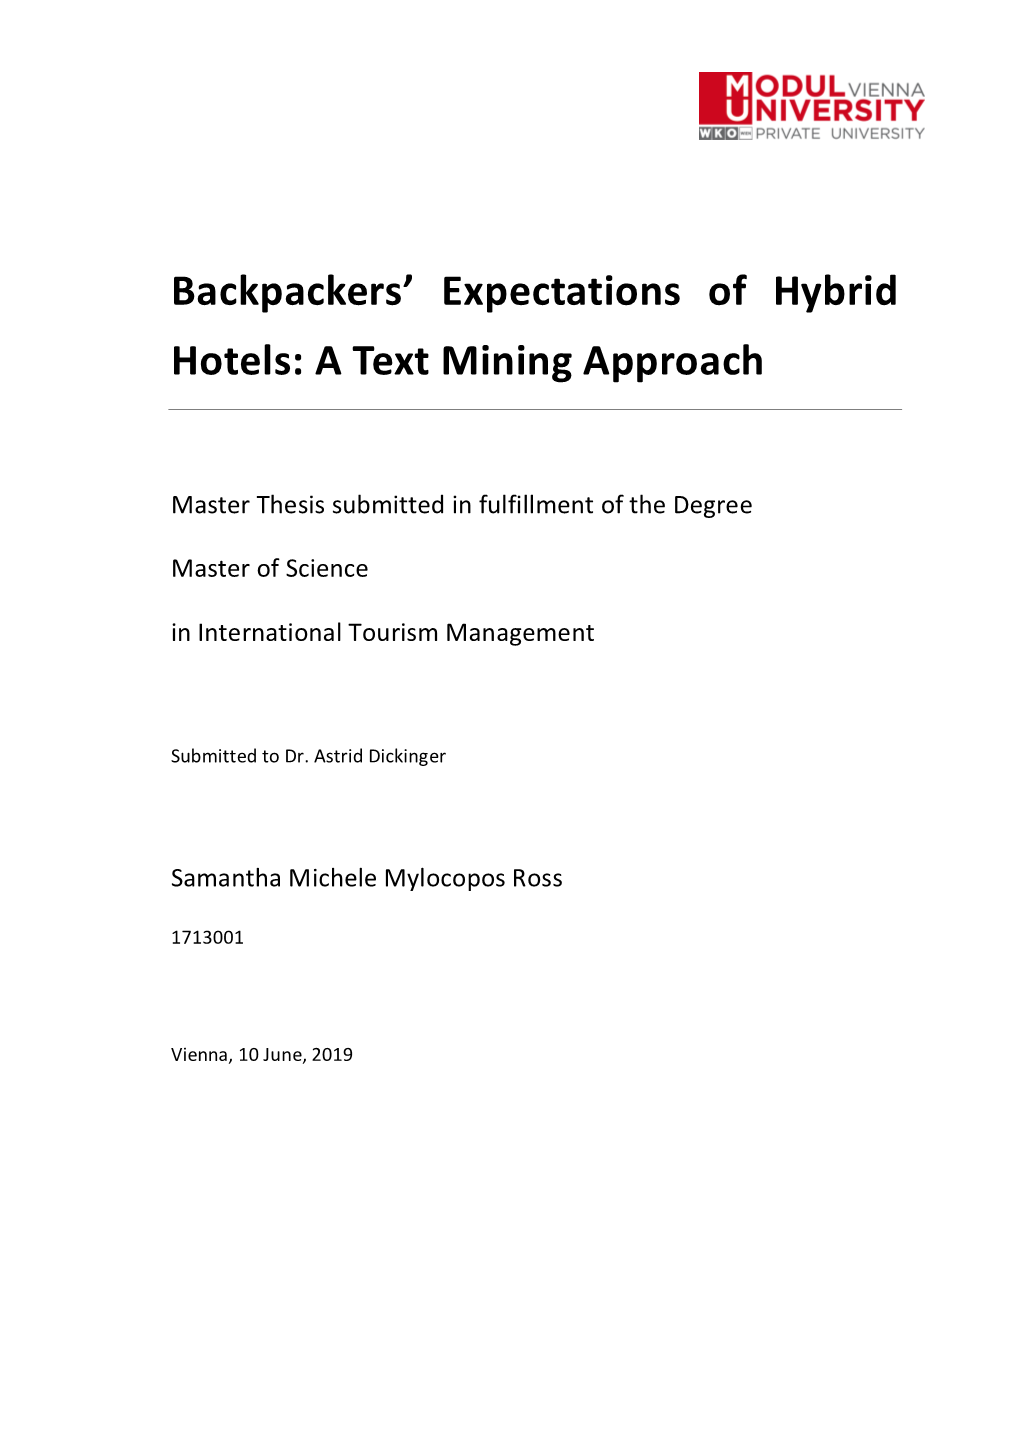 Backpackers' Expectations of Hybrid Hotels